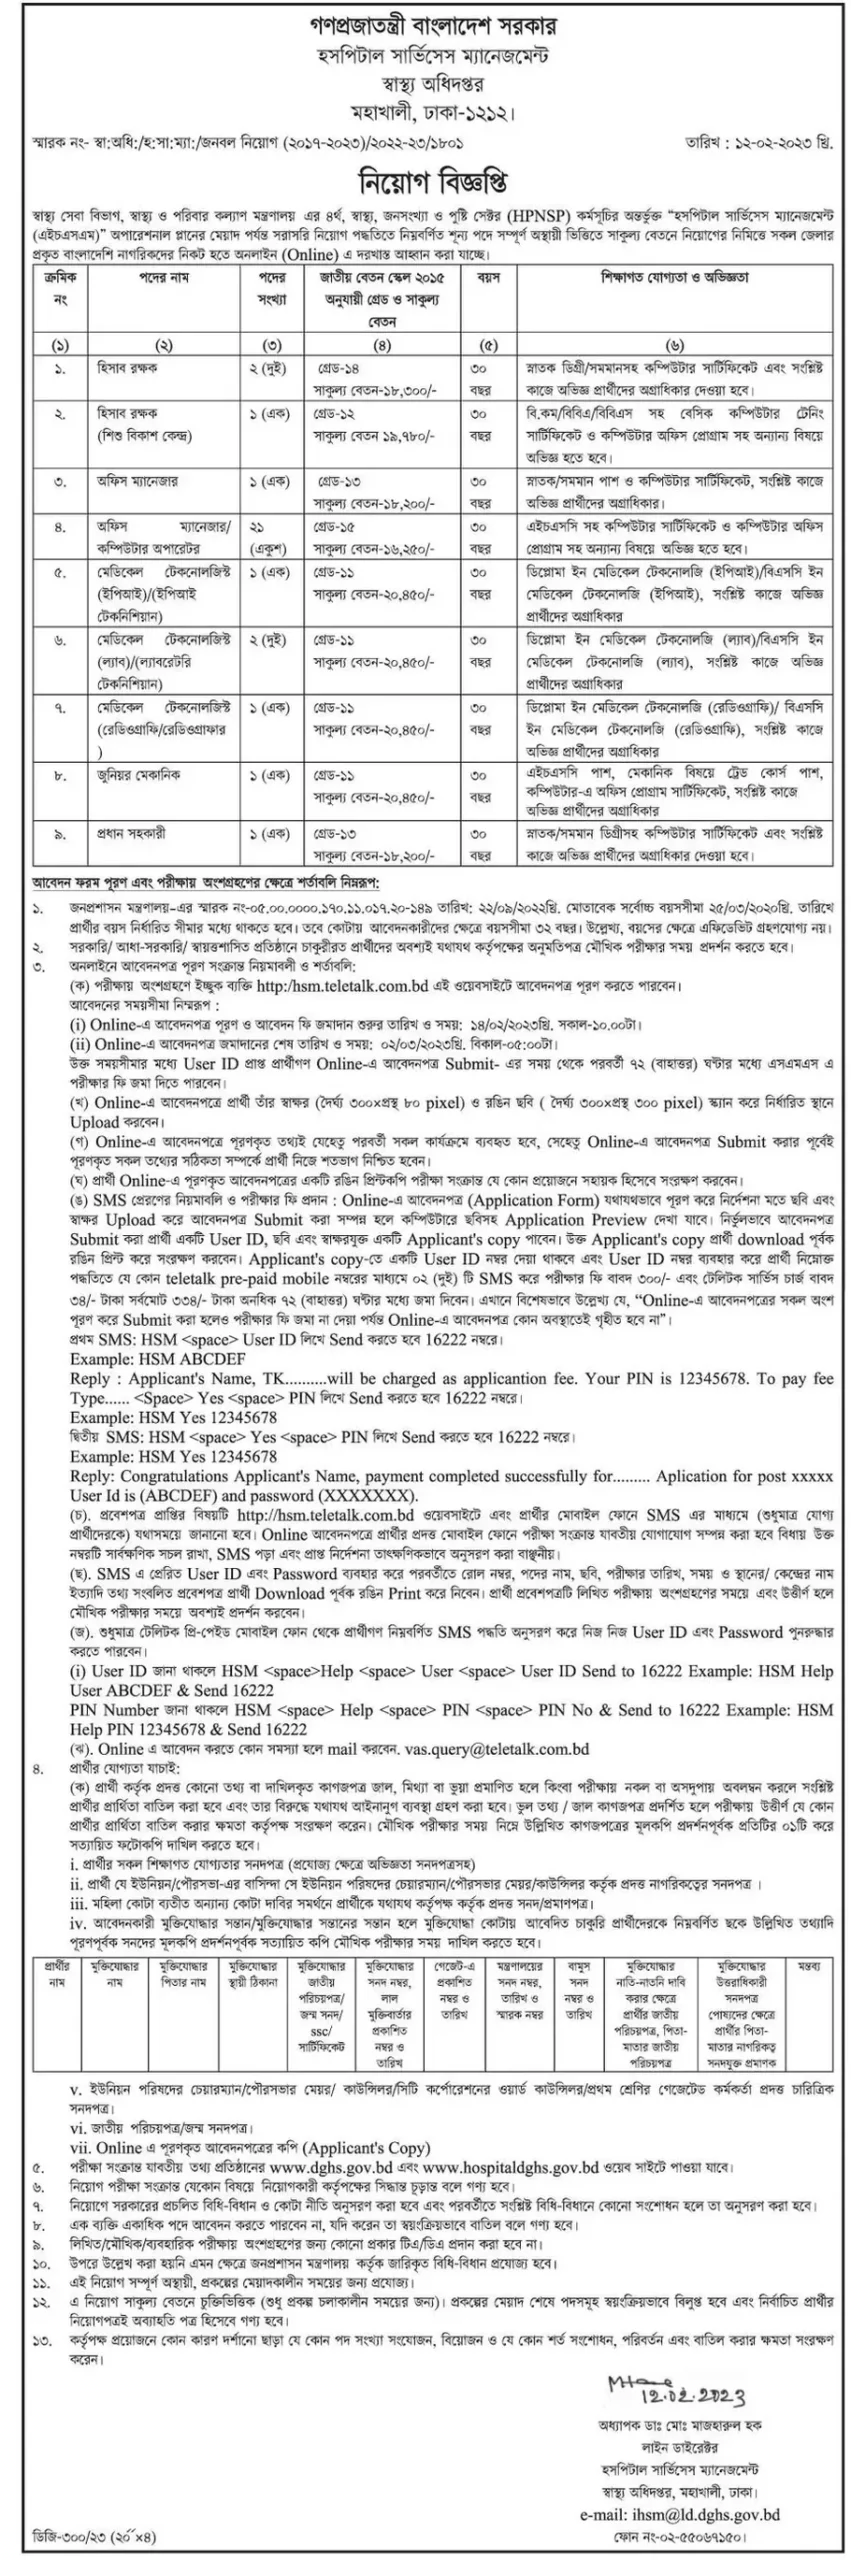 Directorate General of Health Services Job Circular 2023 002 scaled